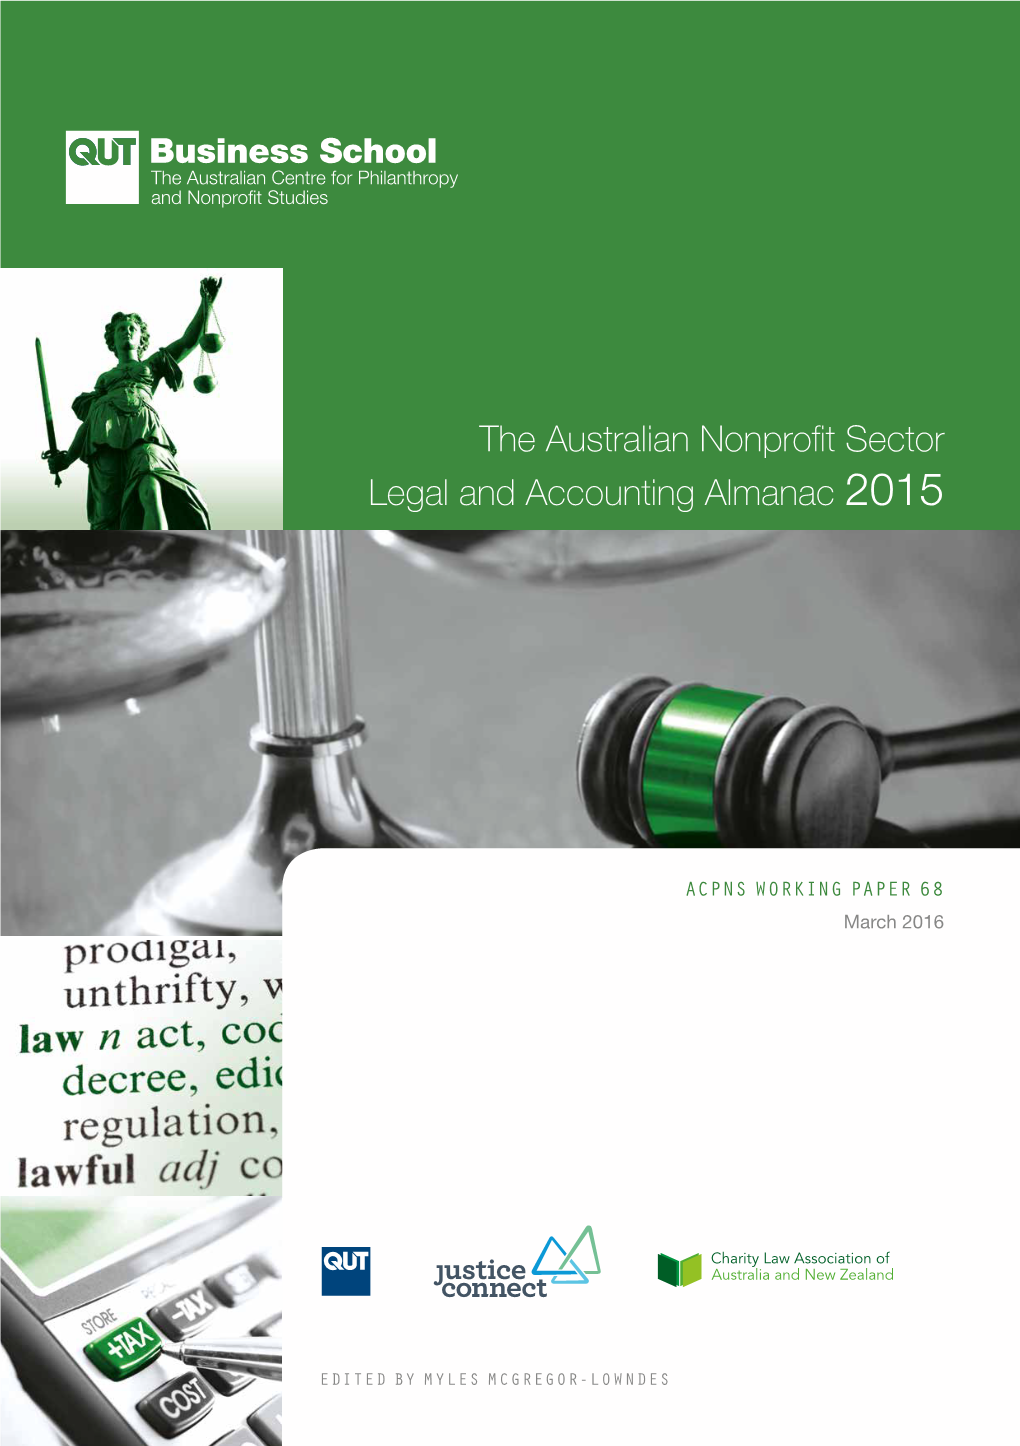 The Australian Nonprofit Sector Legal and Accounting Almanac 2015